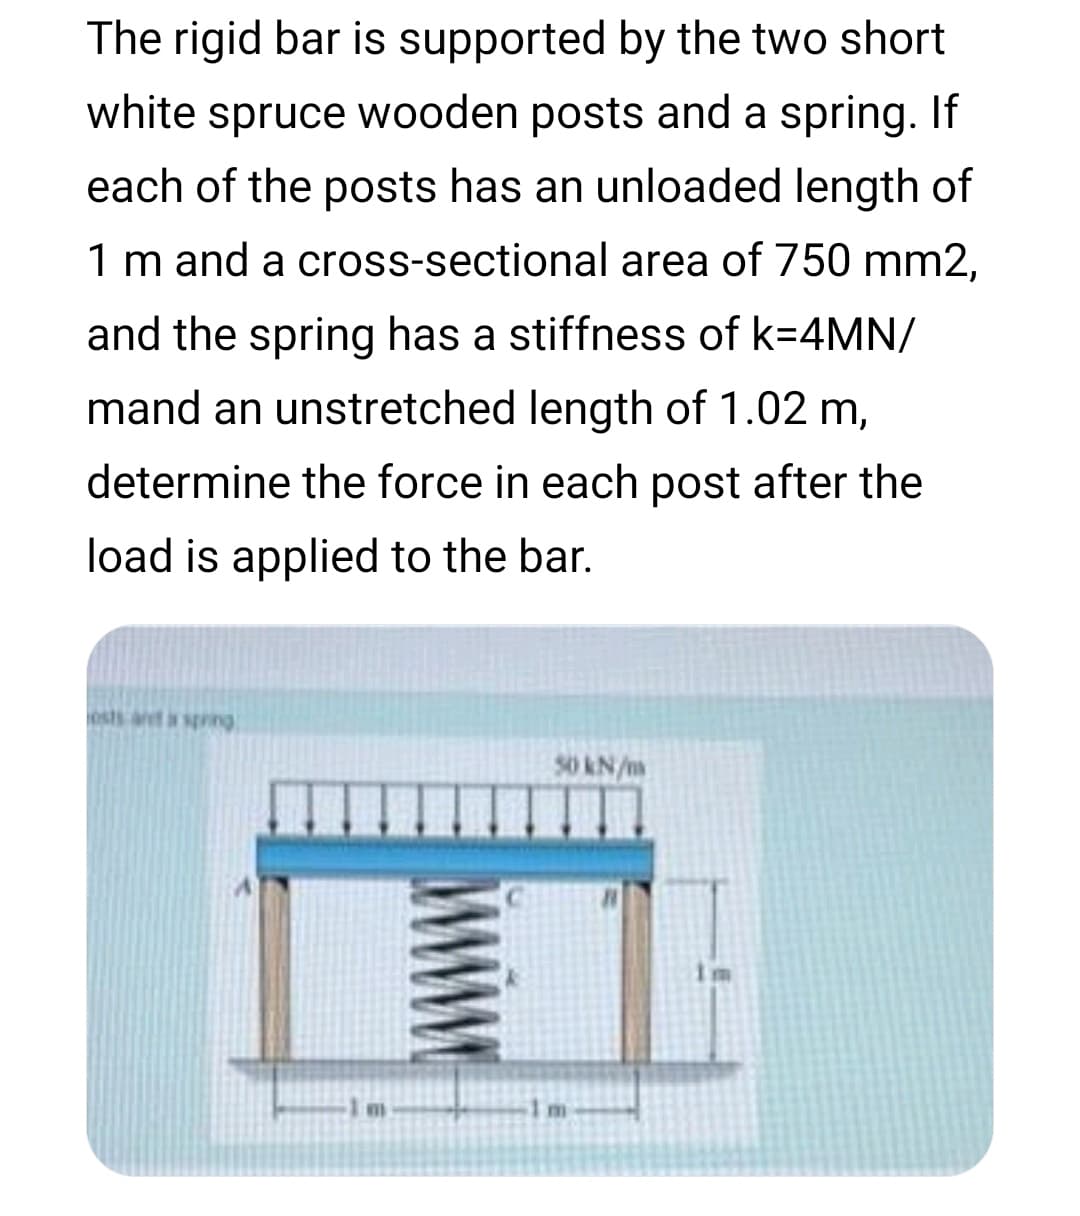 The rigid bar is supported by the two short
white spruce wooden posts and a spring. If
each of the posts has an unloaded length of
1 m and a cross-sectional area of 750 mm2,
and the spring has a stiffness of k=4MN/
mand an unstretched length of 1.02 m,
determine the force in each post after the
load is applied to the bar.
ests anta sng
30 kN/m
1m
